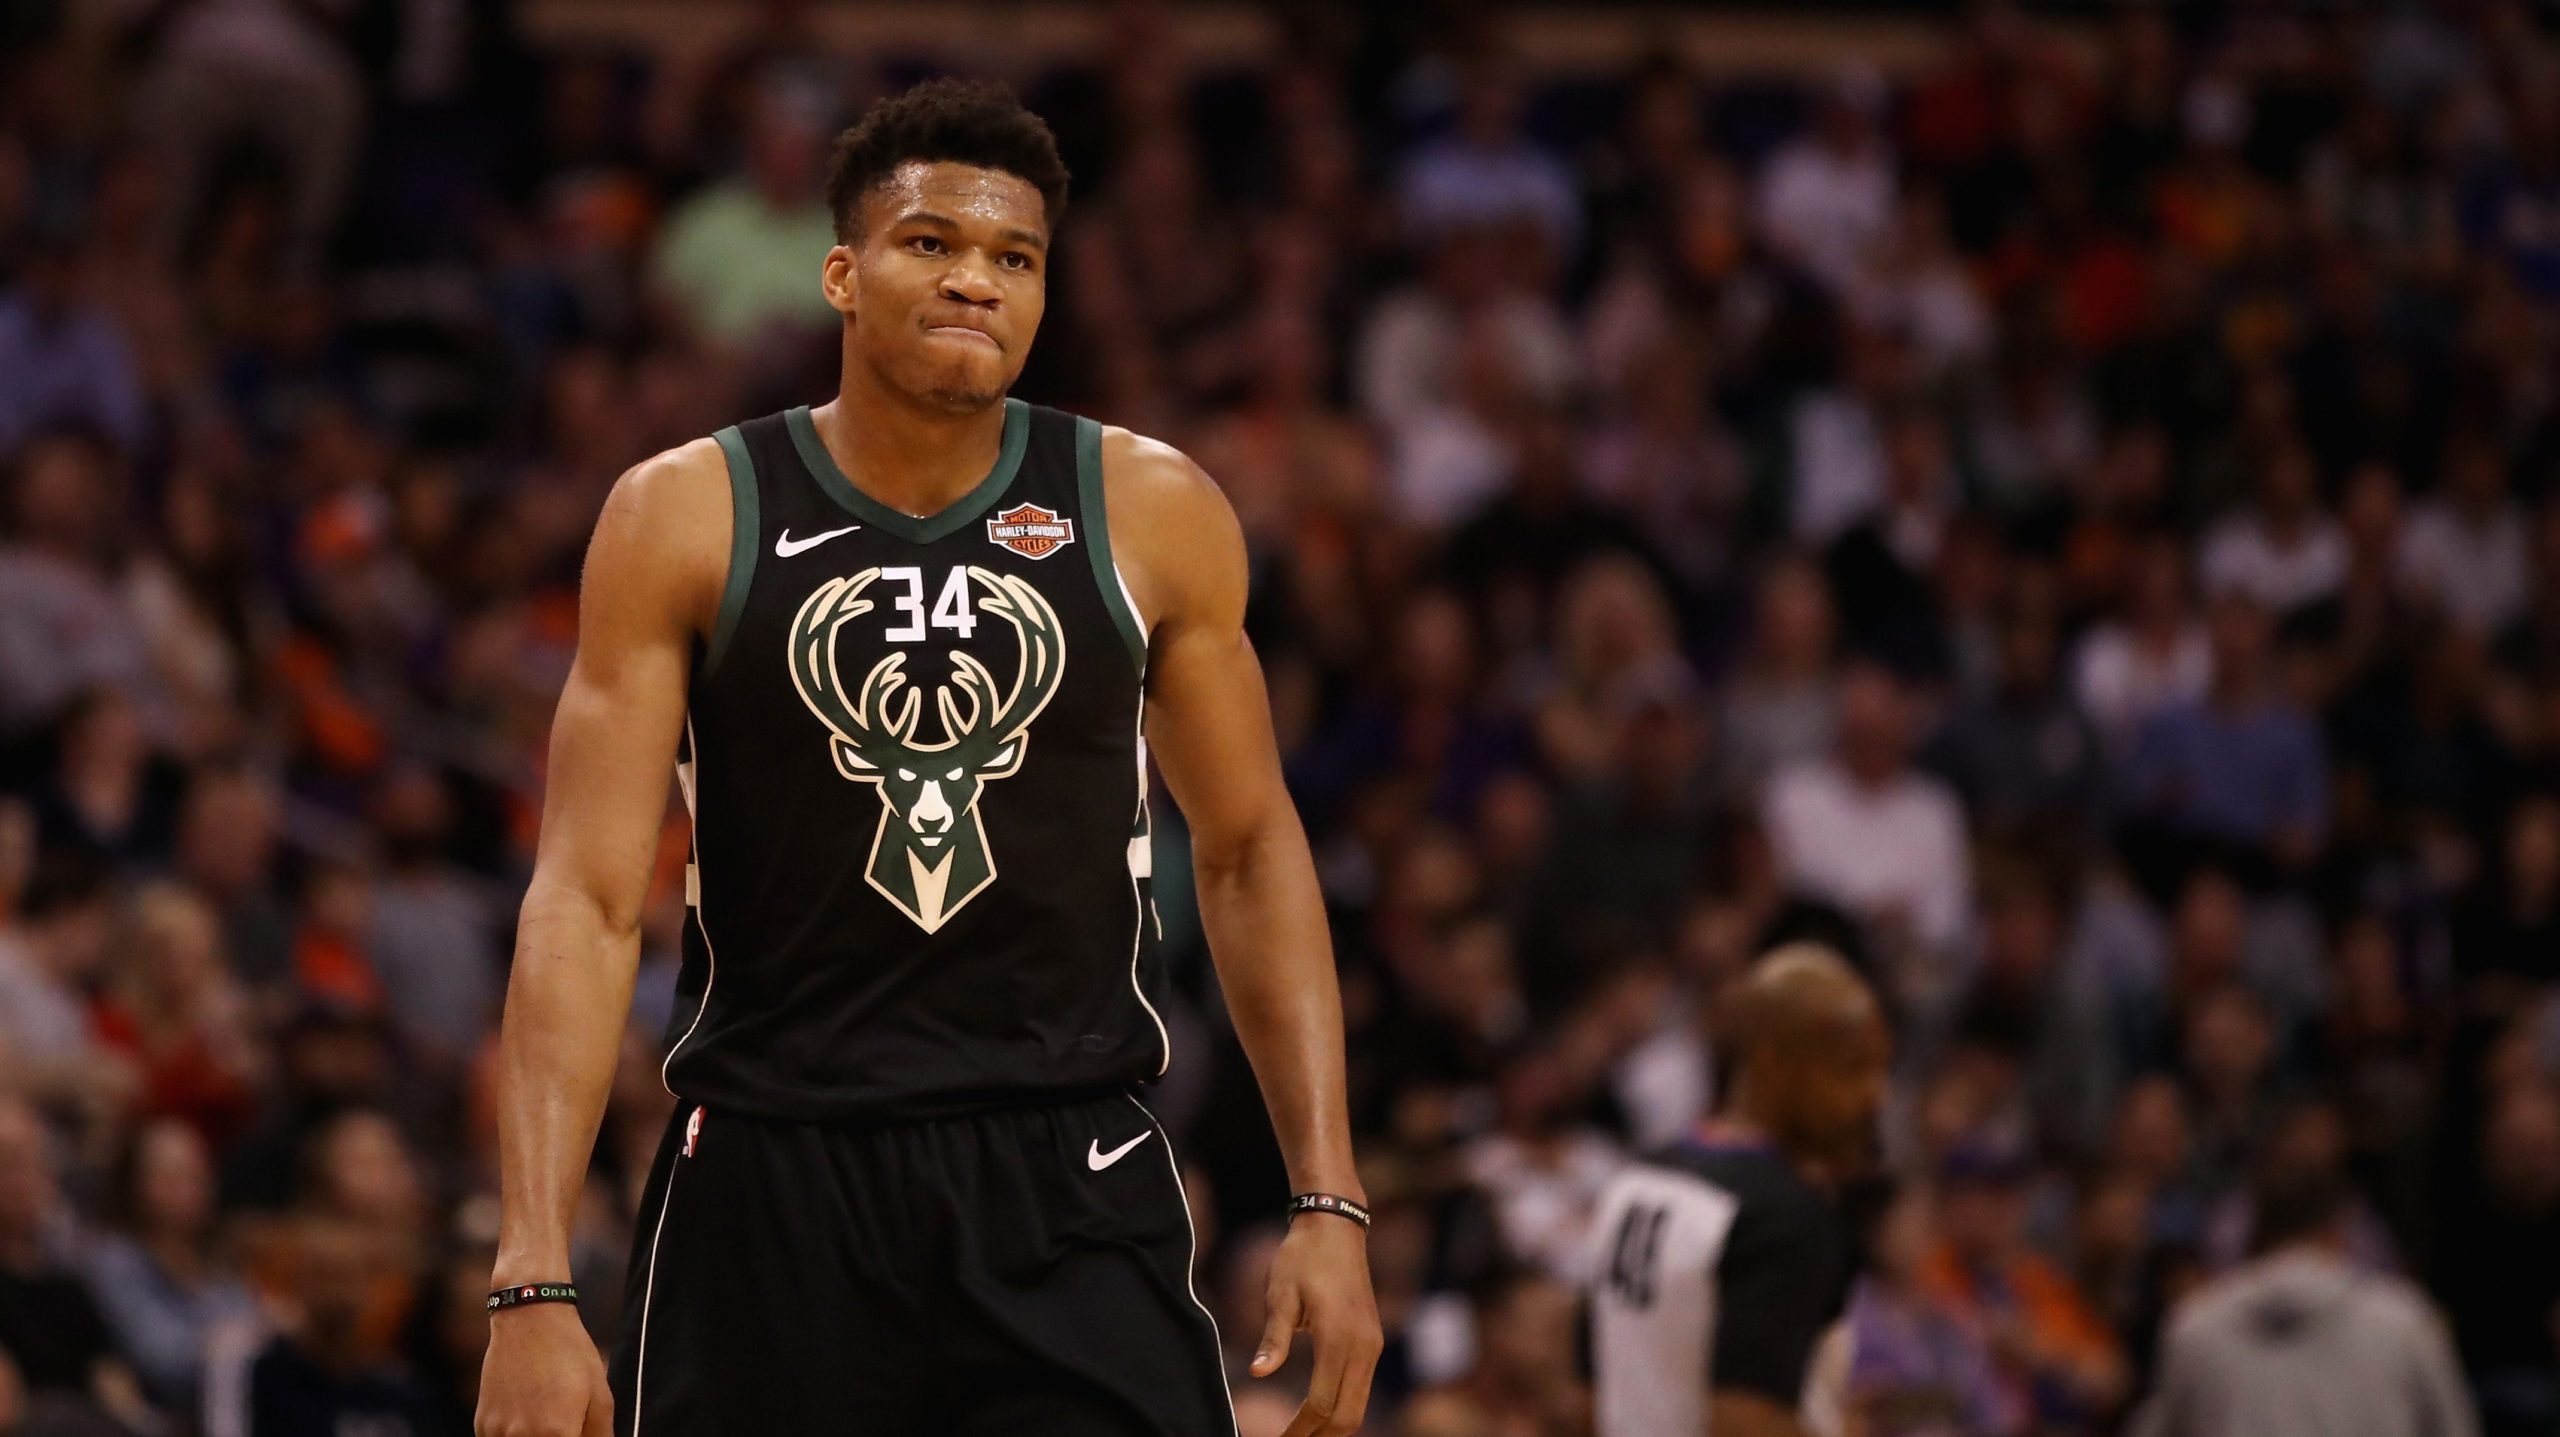 NBA Fines Bucks’ GM For Saying Giannis Antetokounmpo Will Be Offered A Supermax Contract